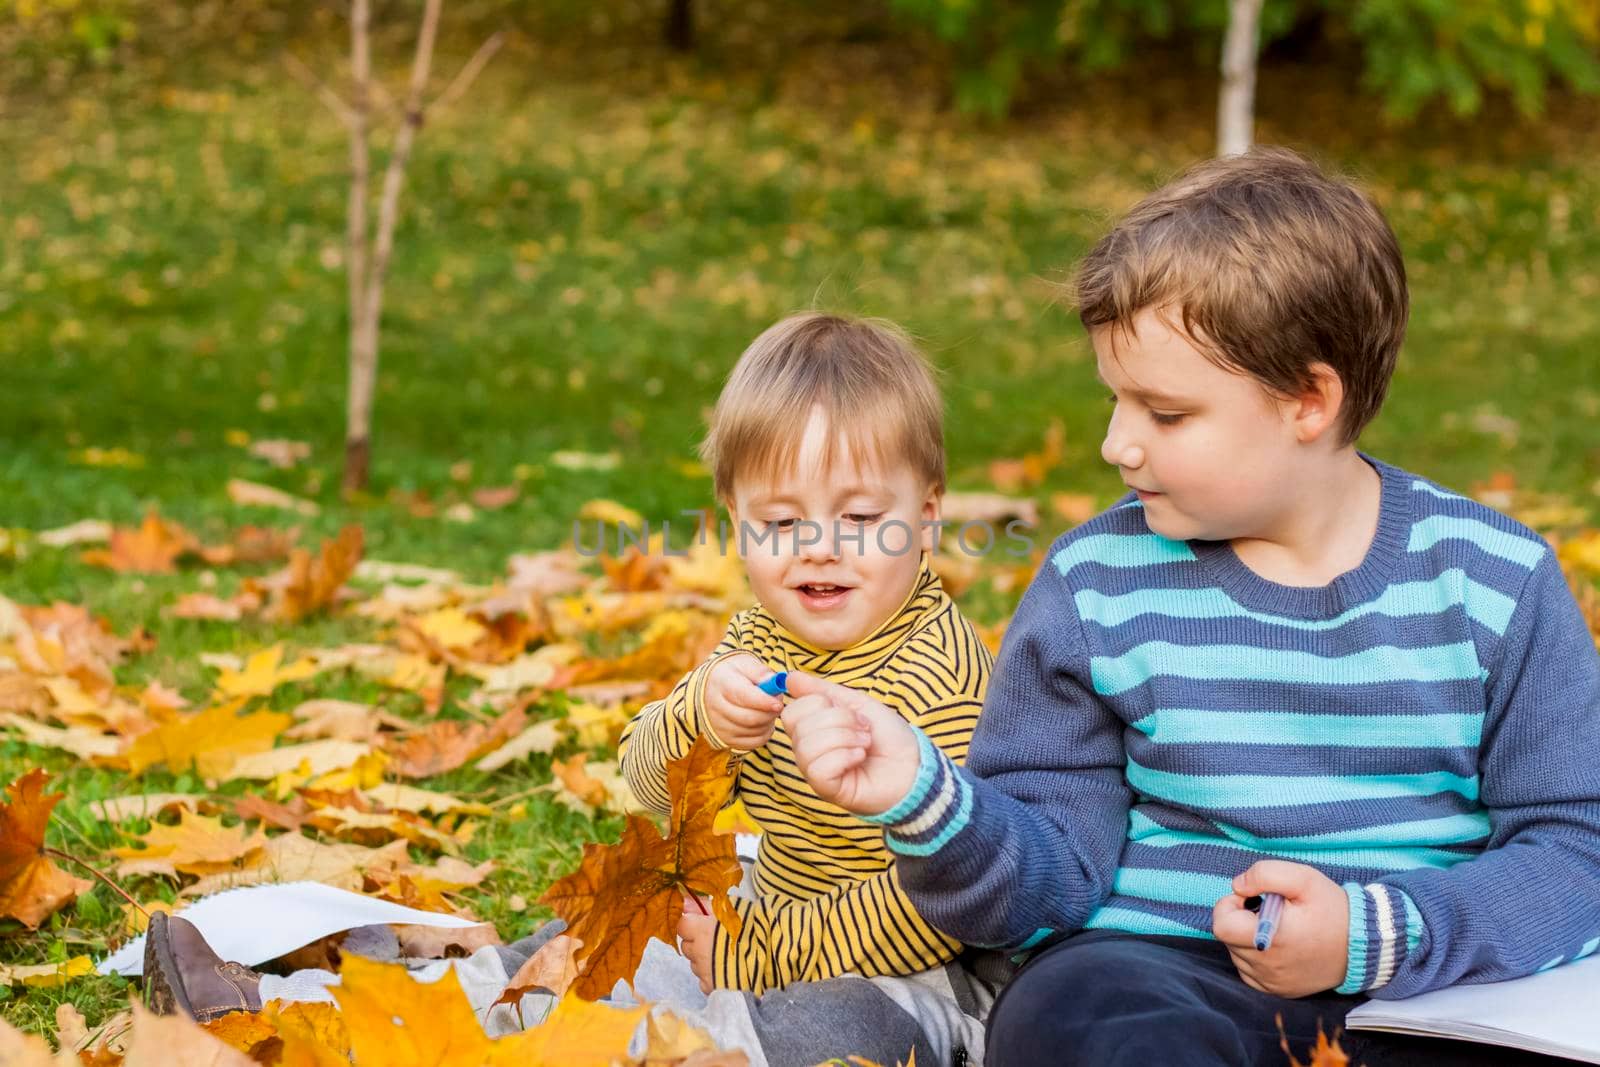 Autumn mood. The boys are sitting on a blanket in the park. Autumn portrait of a child in yellow foliage. Sight. A sweet, caring boy. Autumn